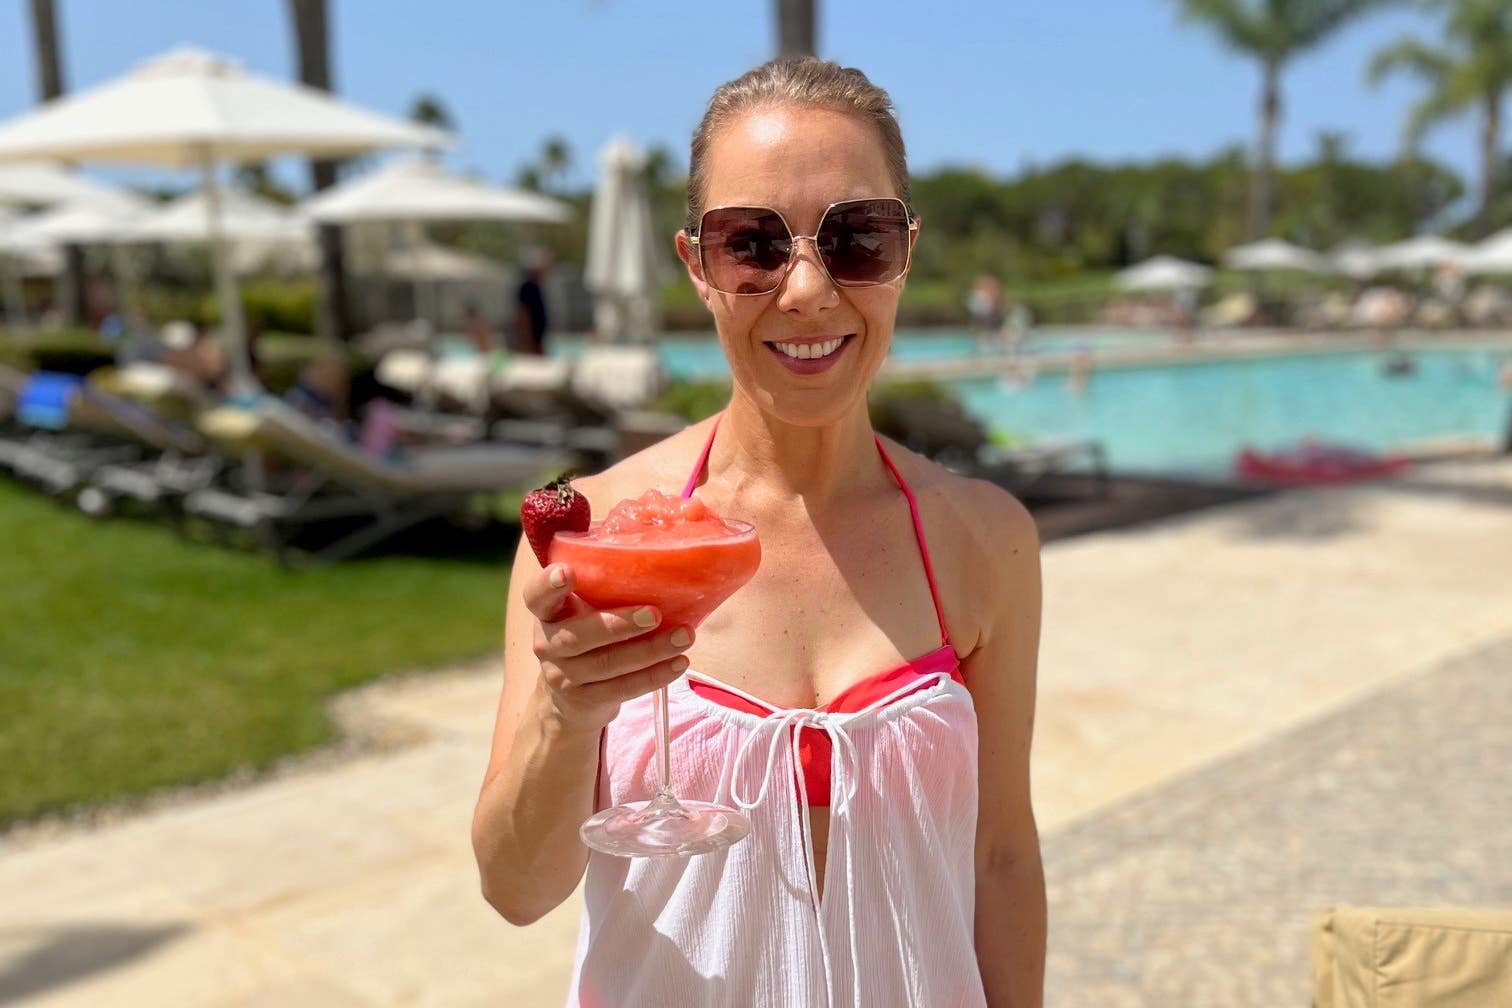 Helen is glad she did not have a double mastectomy because she can wear bikinis on holiday without people knowing she has had surgery (Collect/PA Real Life)